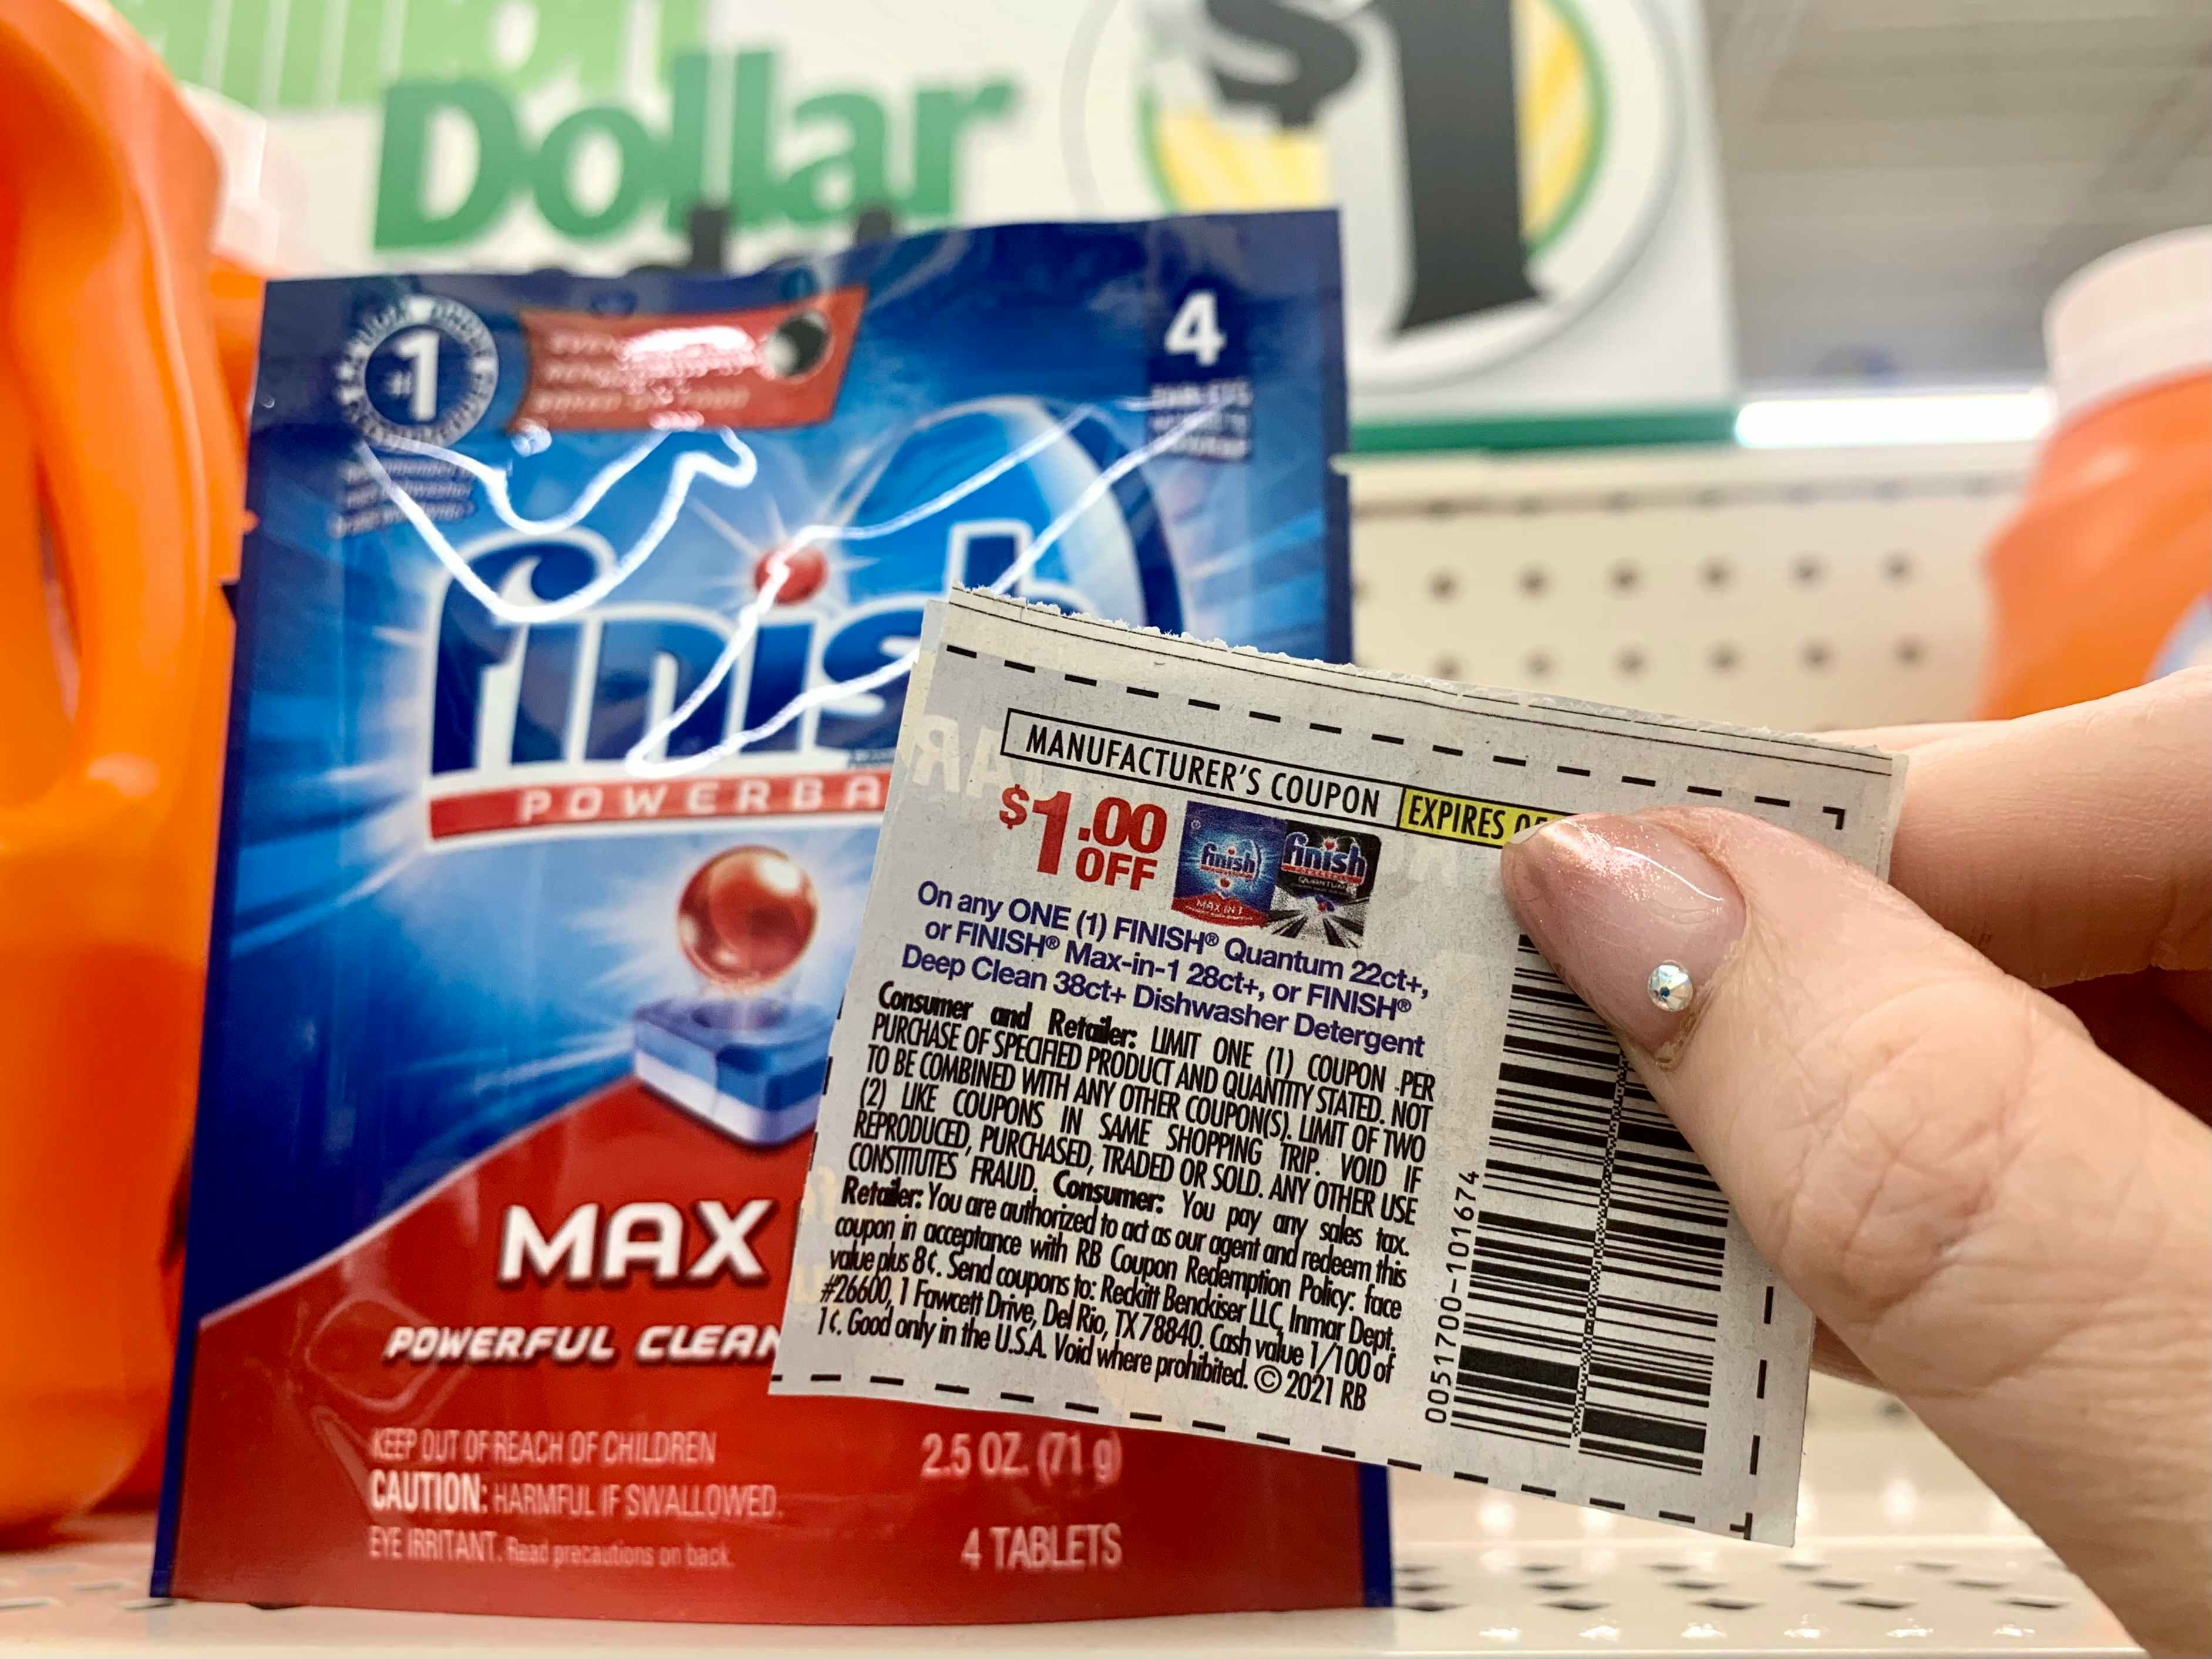 coupon being held in front of finish max dishwashing pods